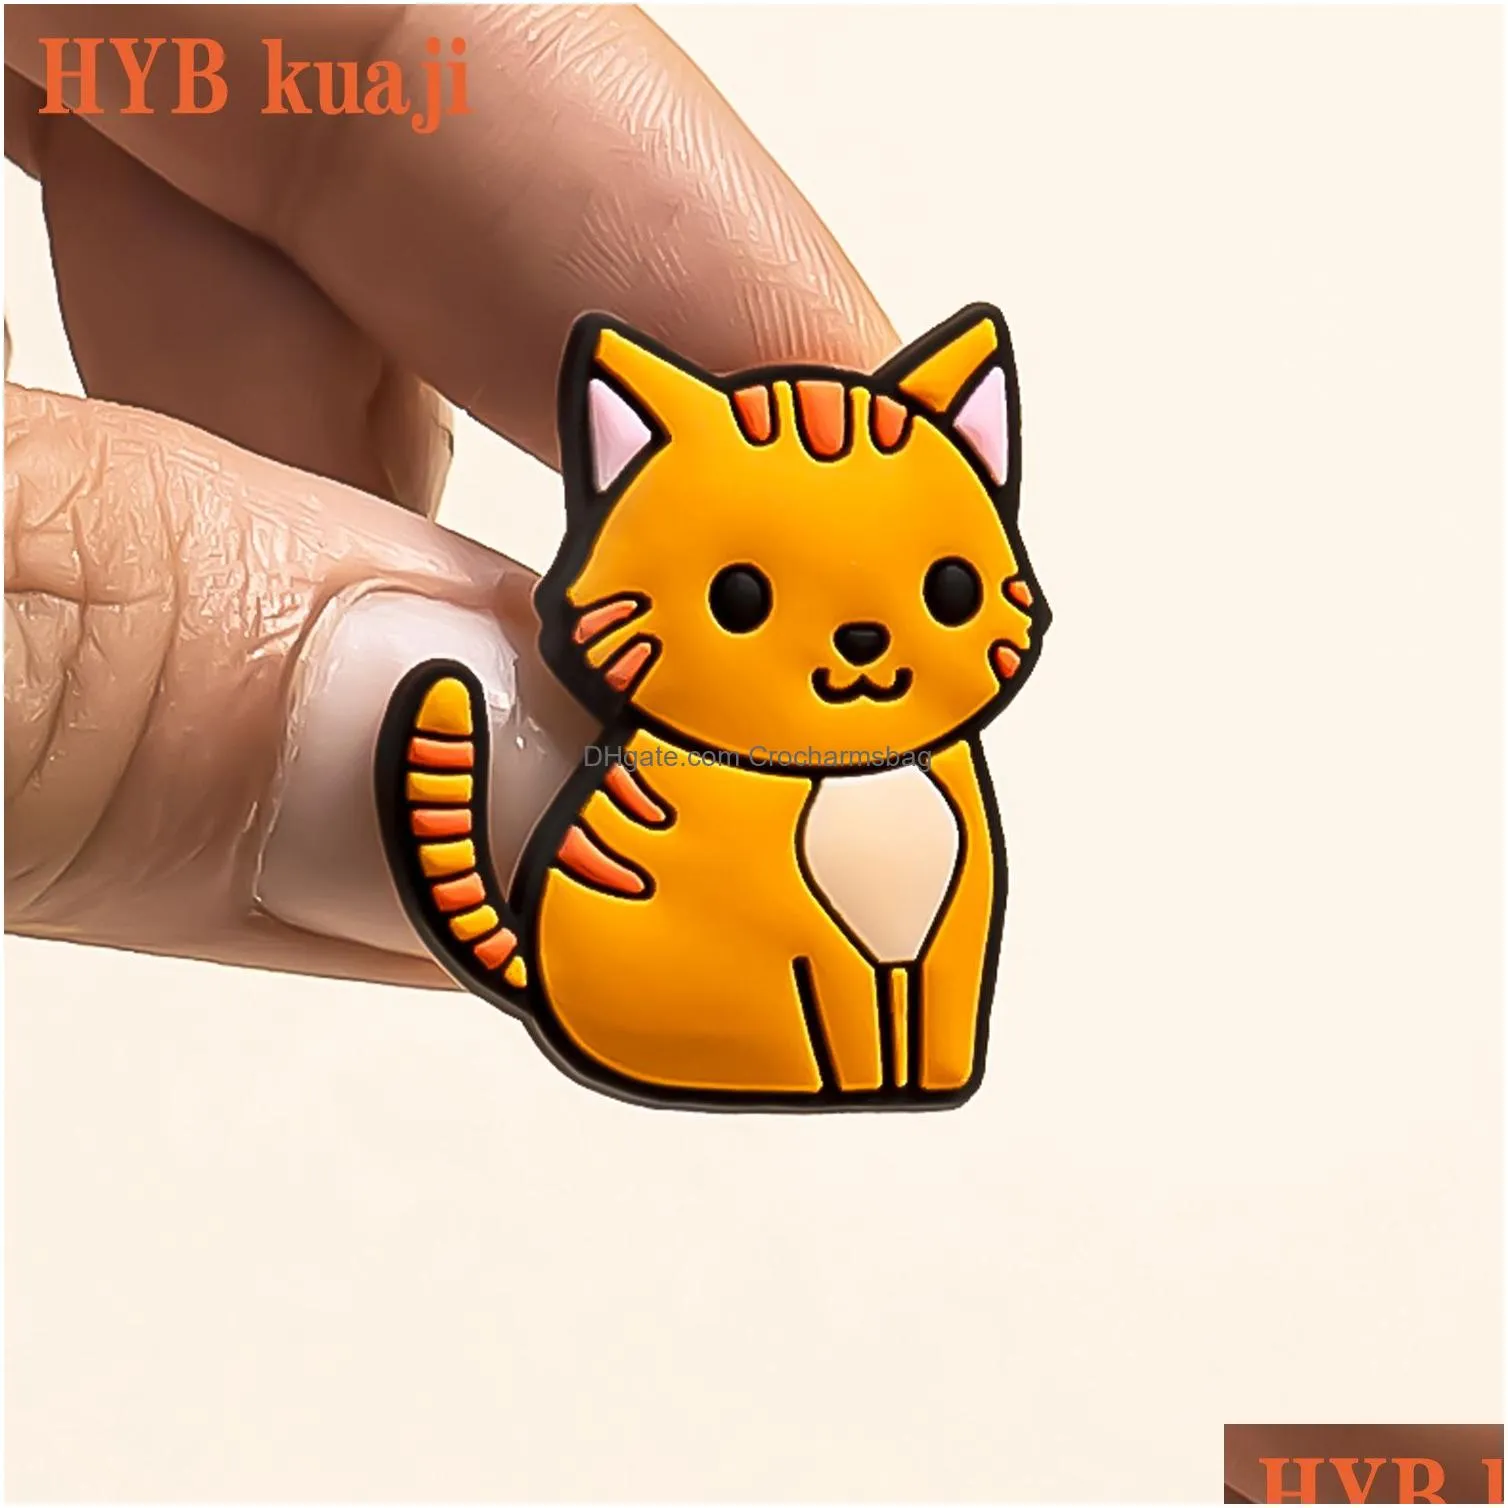 Shoe Parts & Accessories Hybkuaji Custom Cat Mom Paw Charms Wholesale Shoes Decorations Pvc Buckles For Drop Delivery Dhgfg